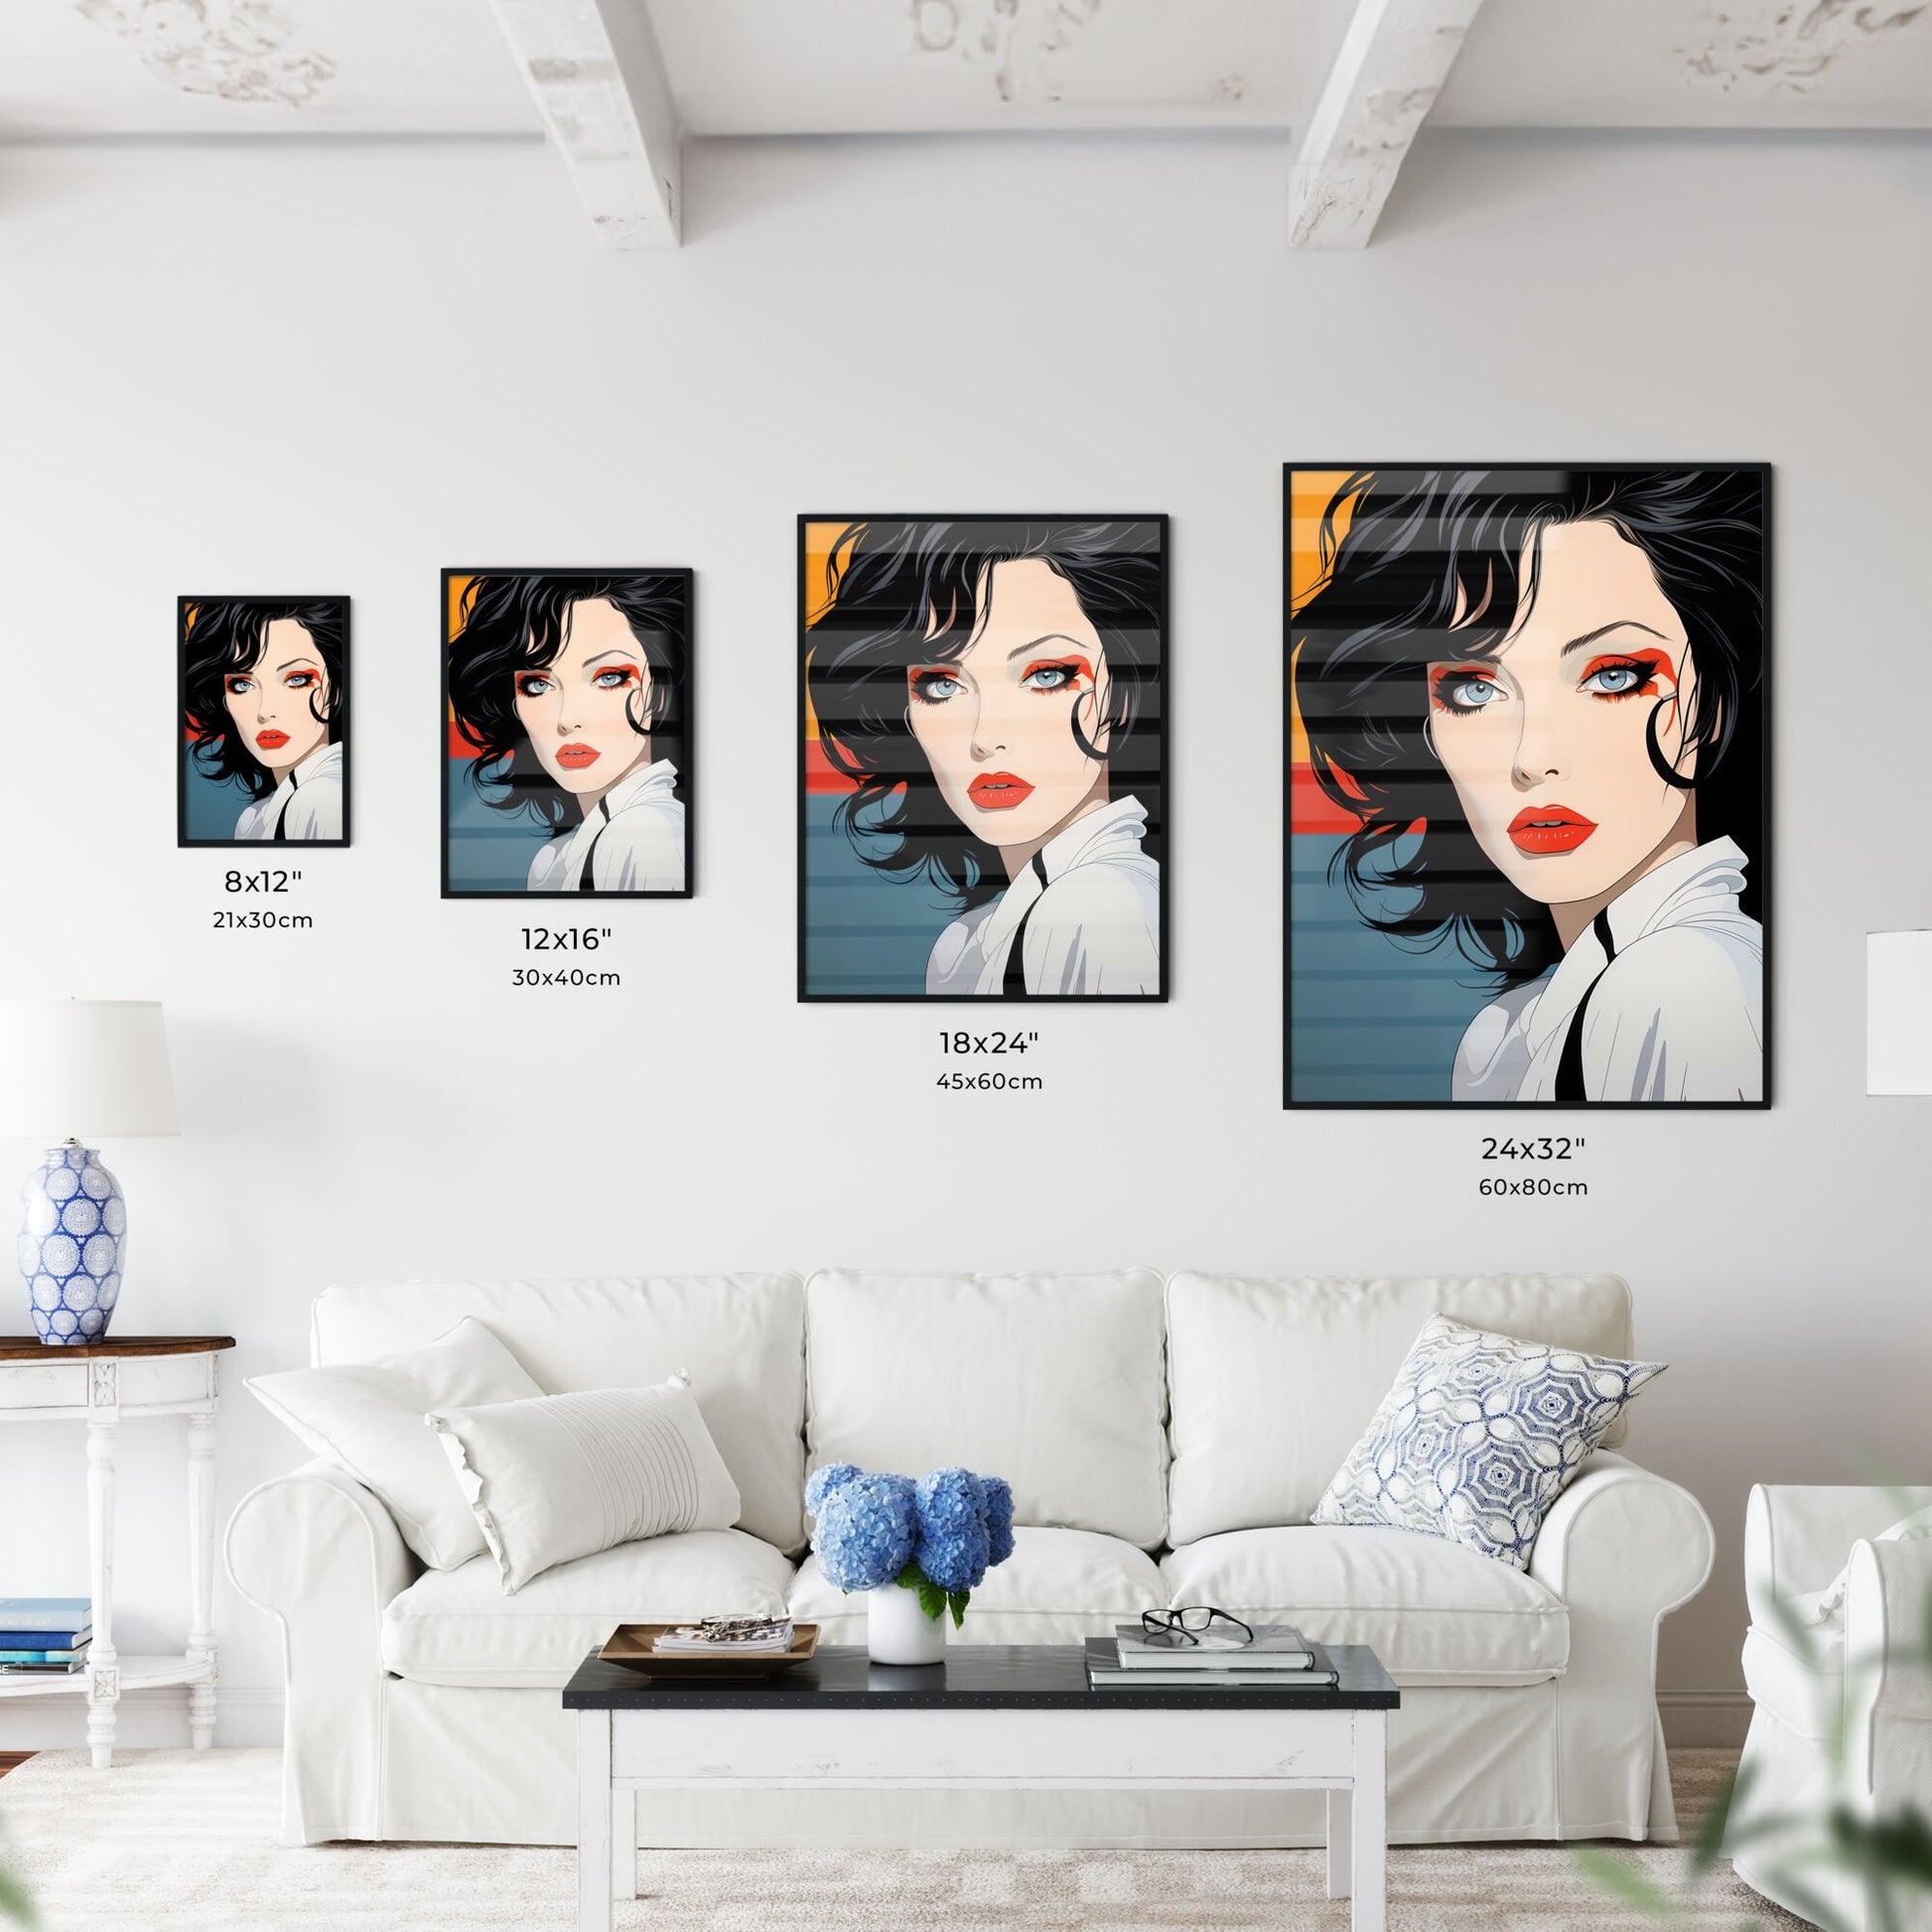 A Poster of Illustration - A Woman With Black Hair And Red Lips Default Title